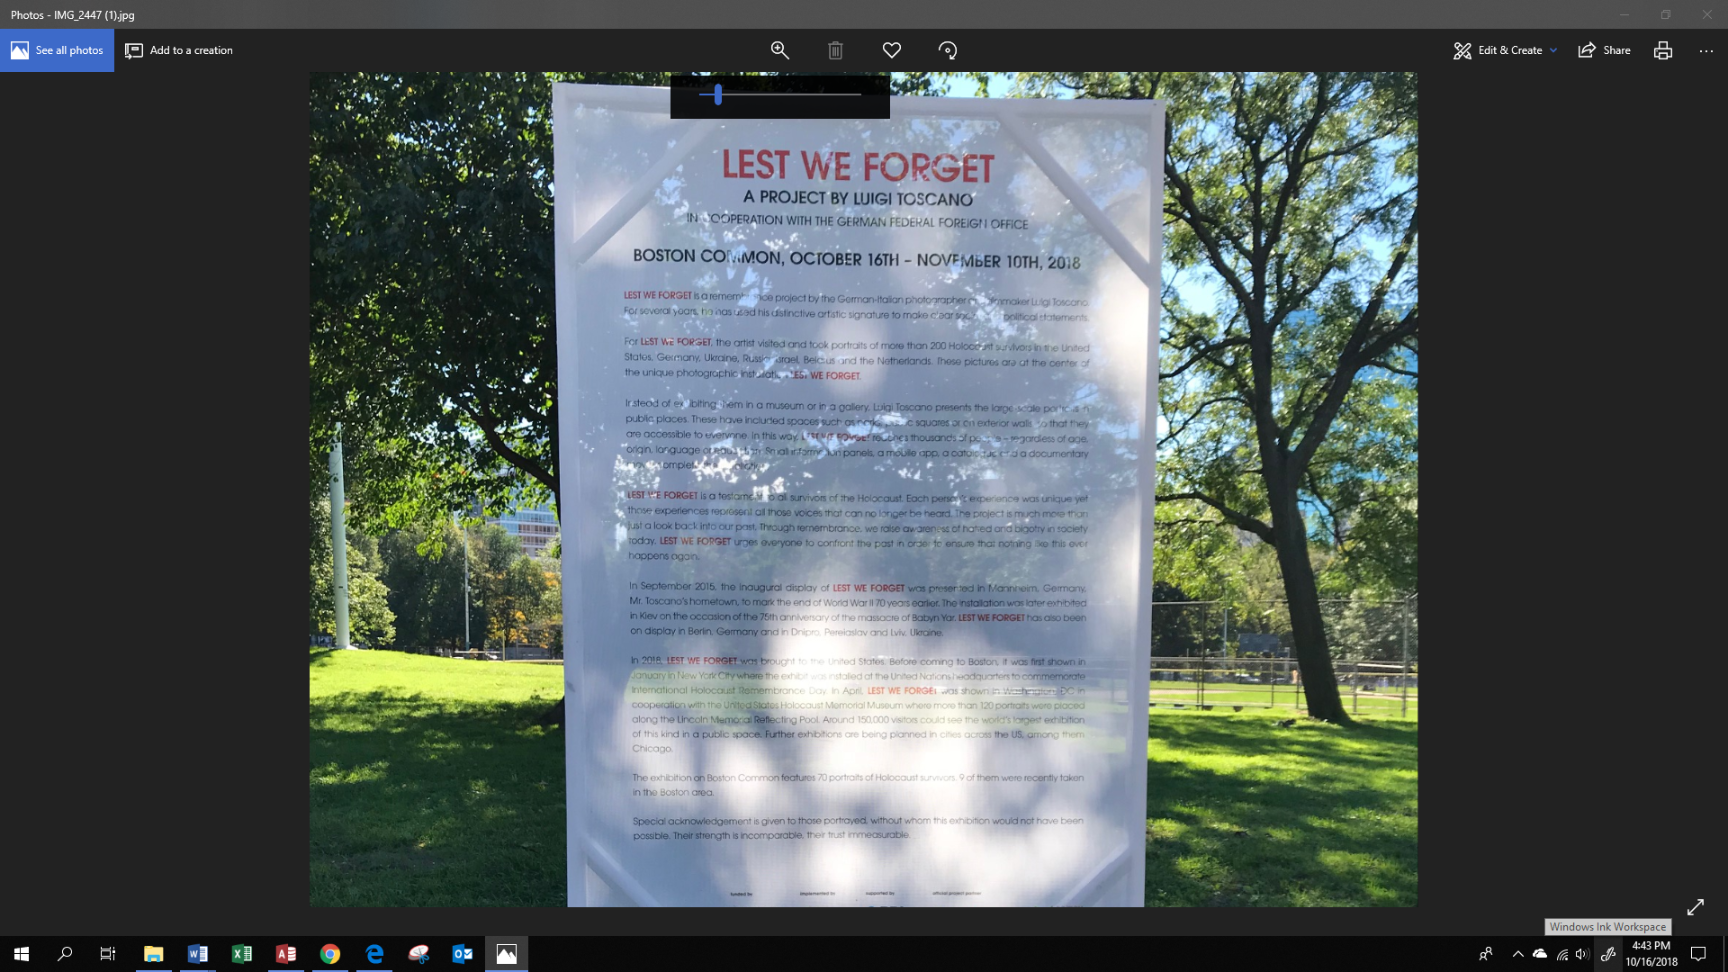 lest we forget poster.png